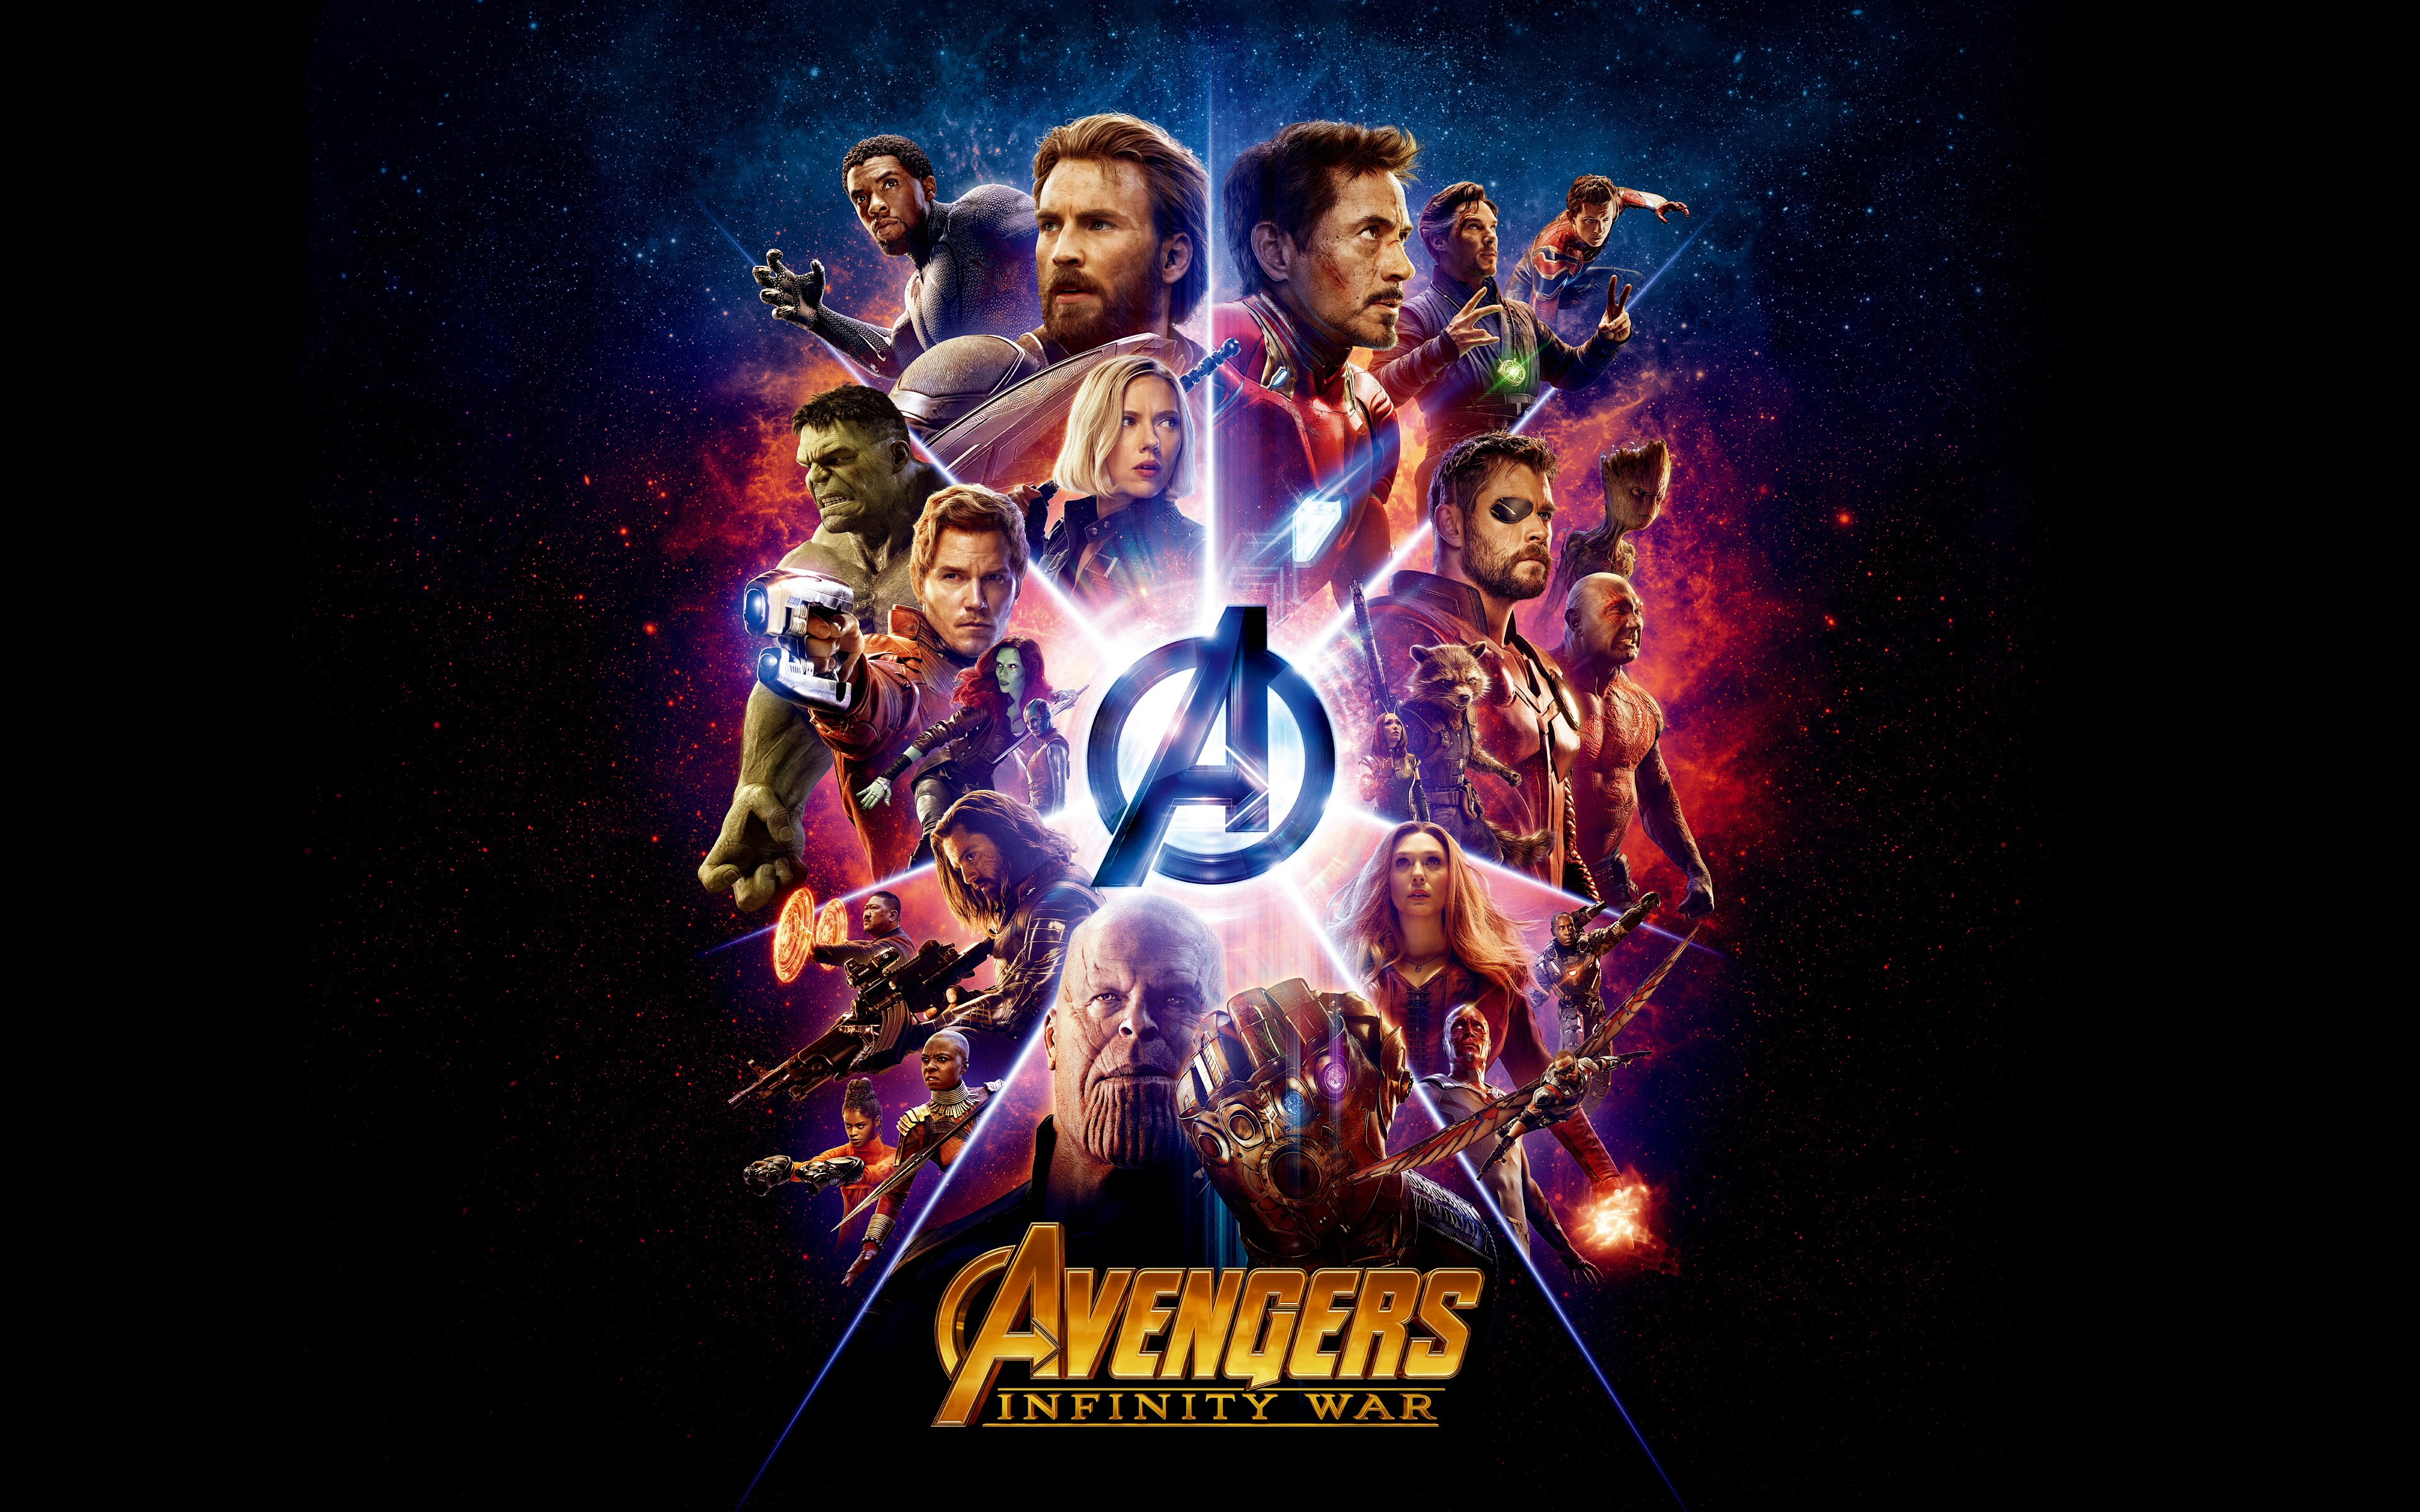 All the heroes from Avengers: Infinity War wallpaper 3840x2400